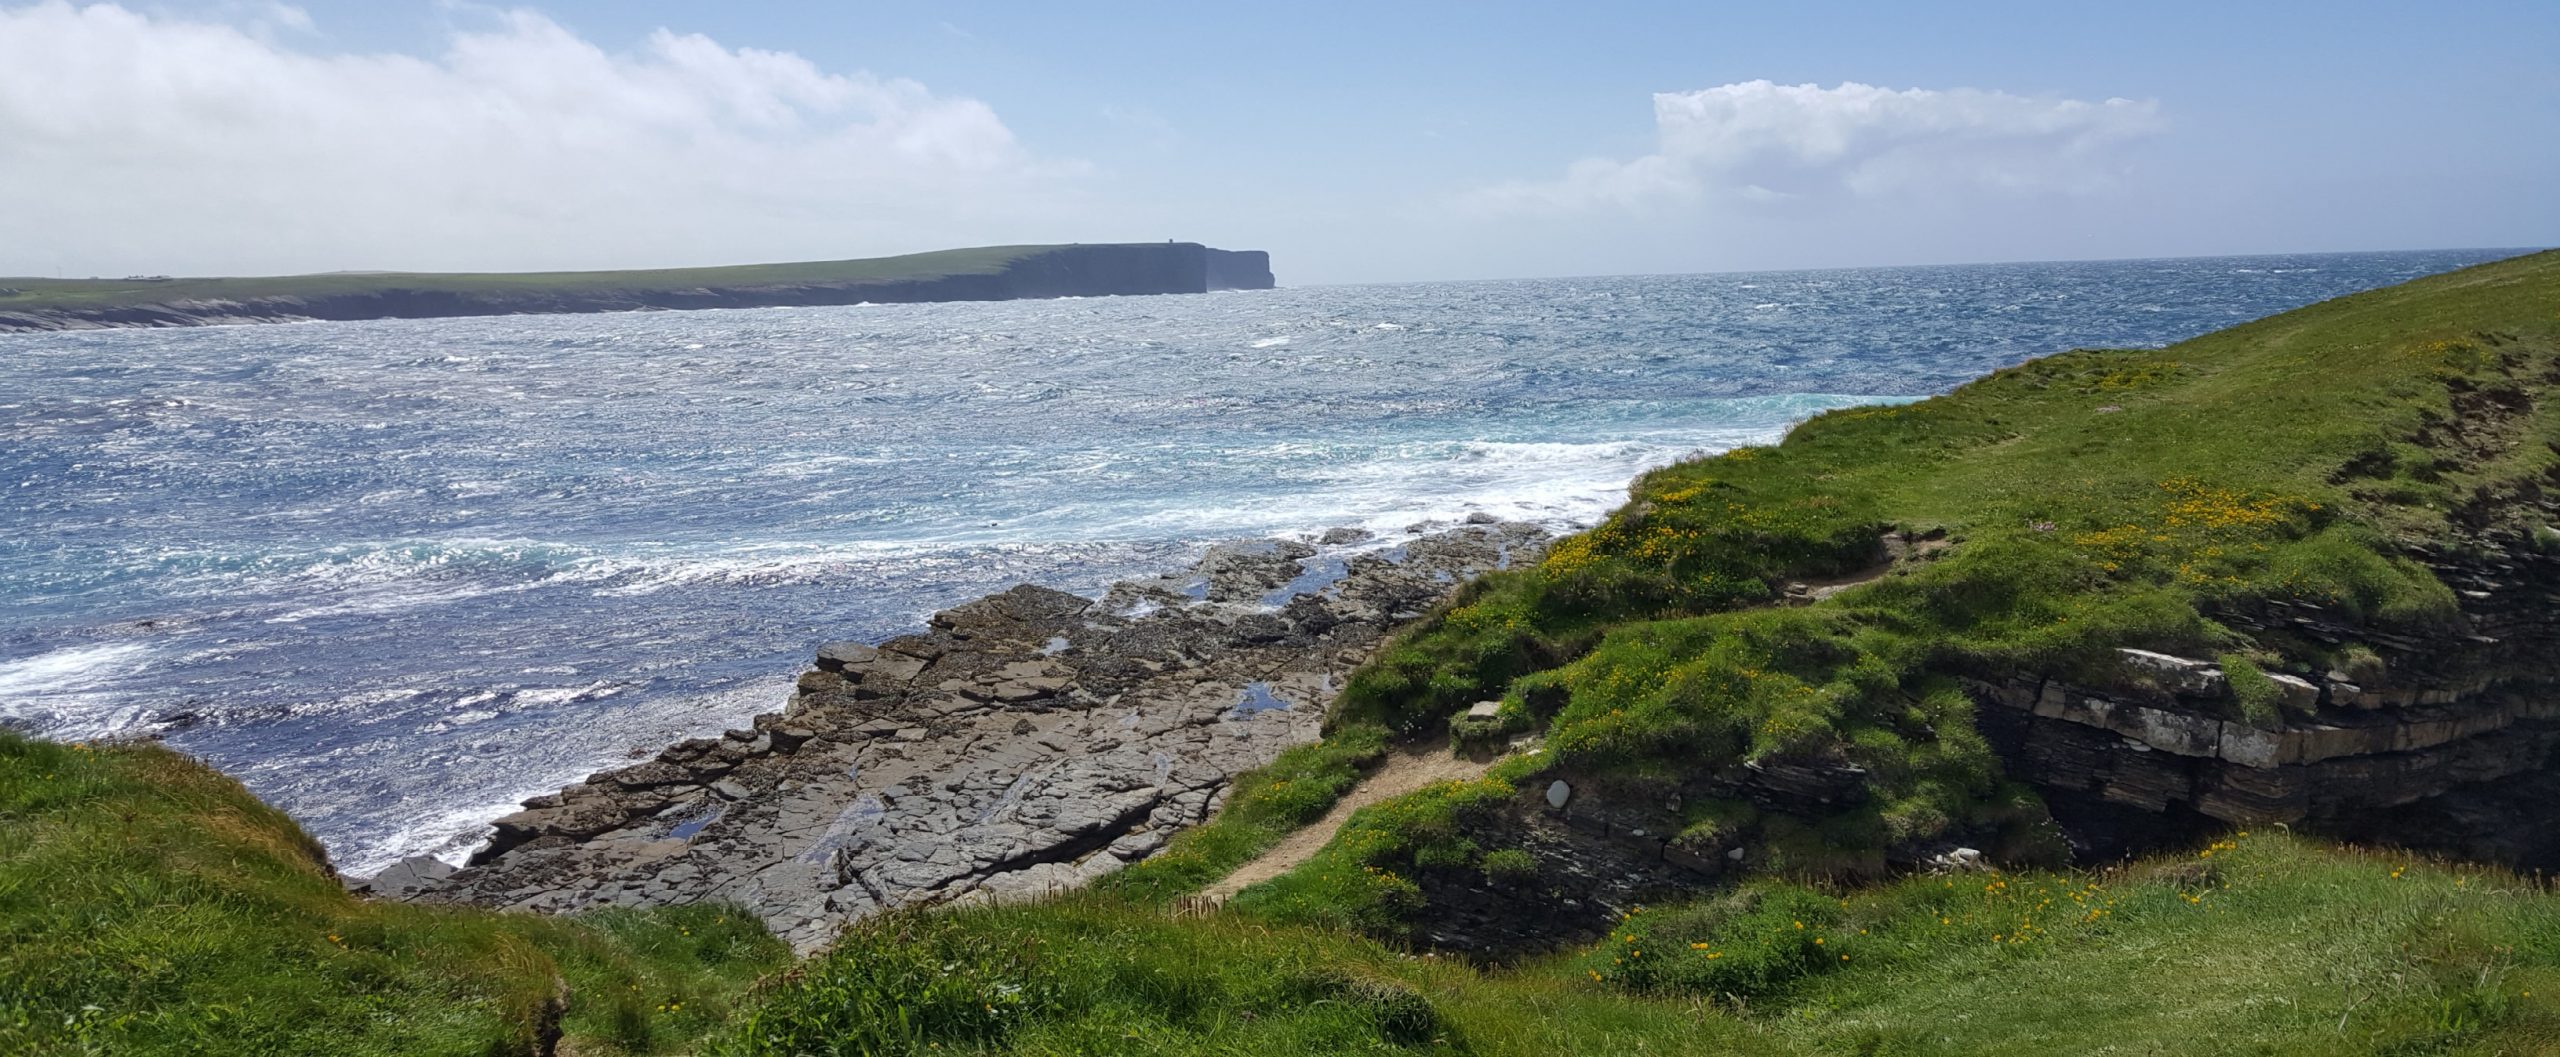 ACCESSING THE PAST ON ORKNEY